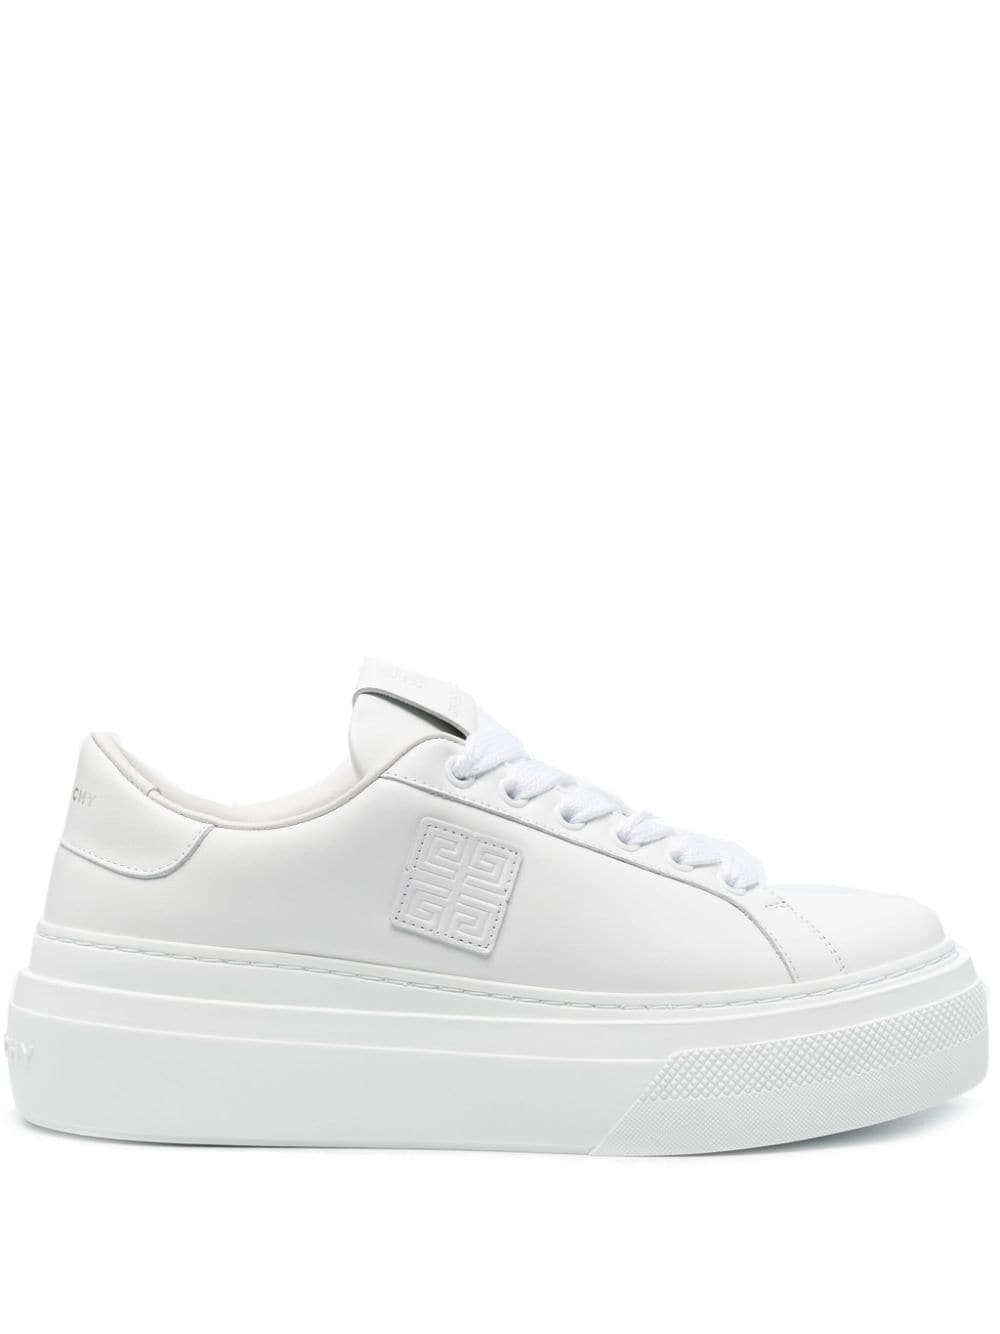 Givenchy City platform leather sneakers - White von Givenchy